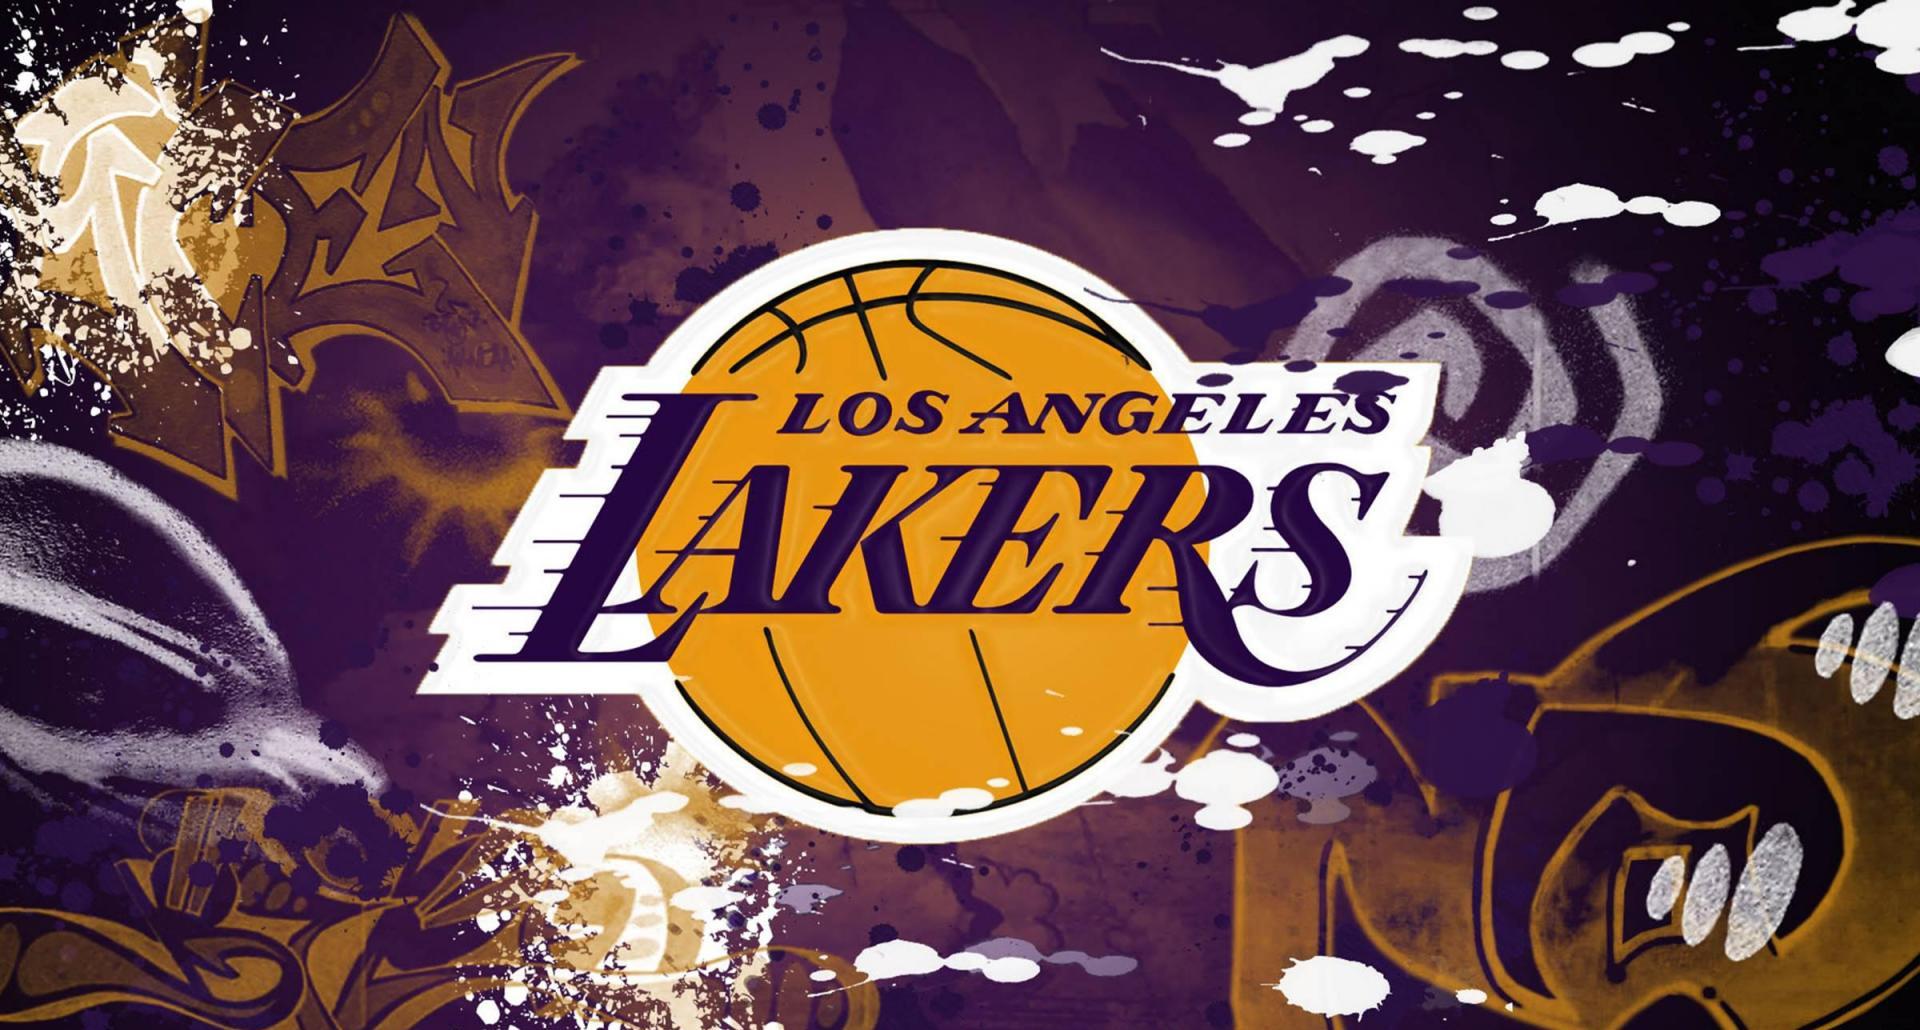 Lakers Background Wallpaper Win10 Themes